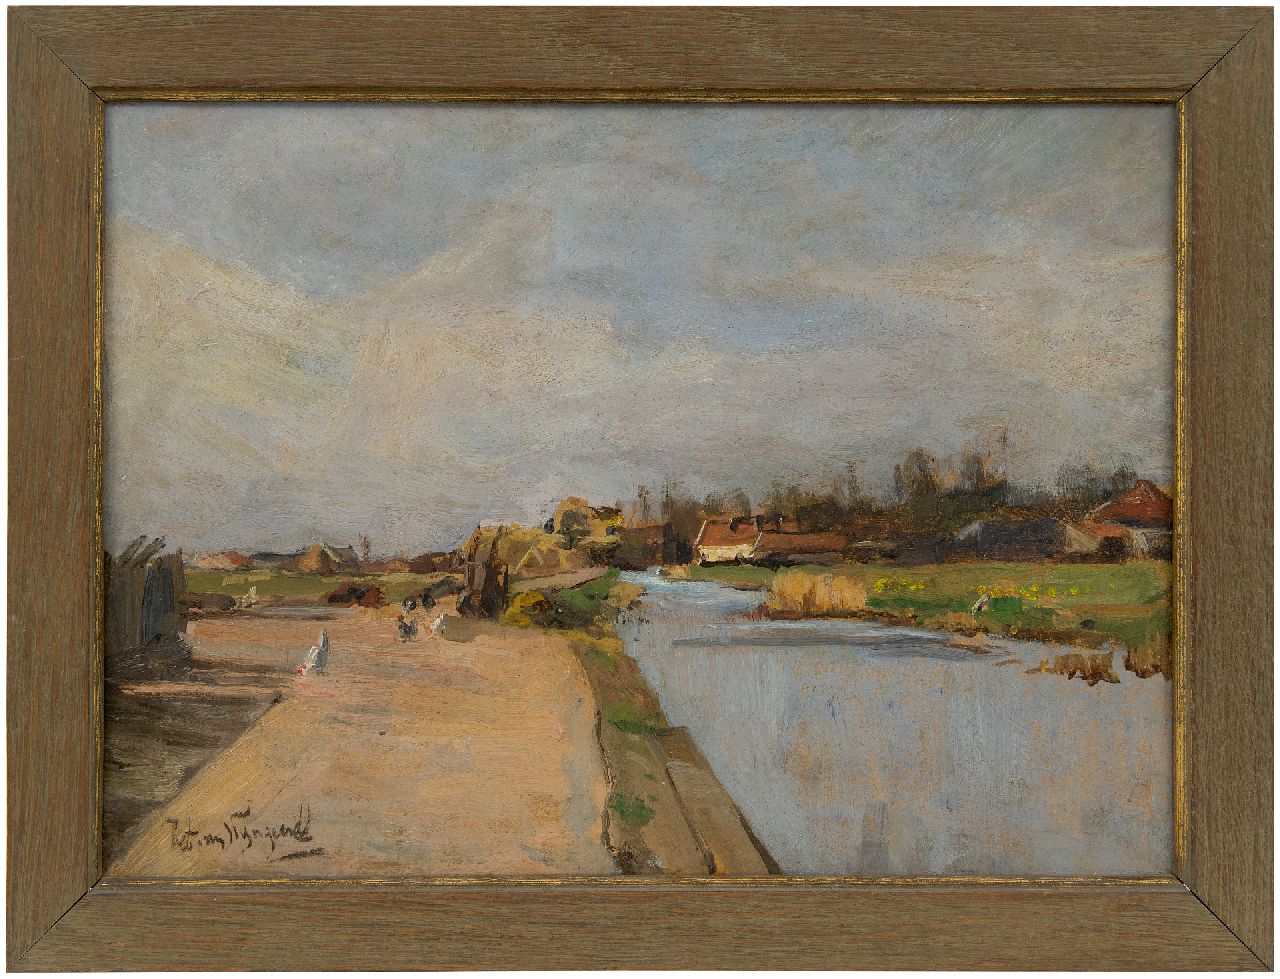 Wijngaerdt P.T. van | Petrus Theodorus 'Piet' van Wijngaerdt | Paintings offered for sale | A view of the  Amstelveenseweg near Amsterdam, oil on board 37.0 x 50.0 cm, signed l.l. and dated on the reverse 1900